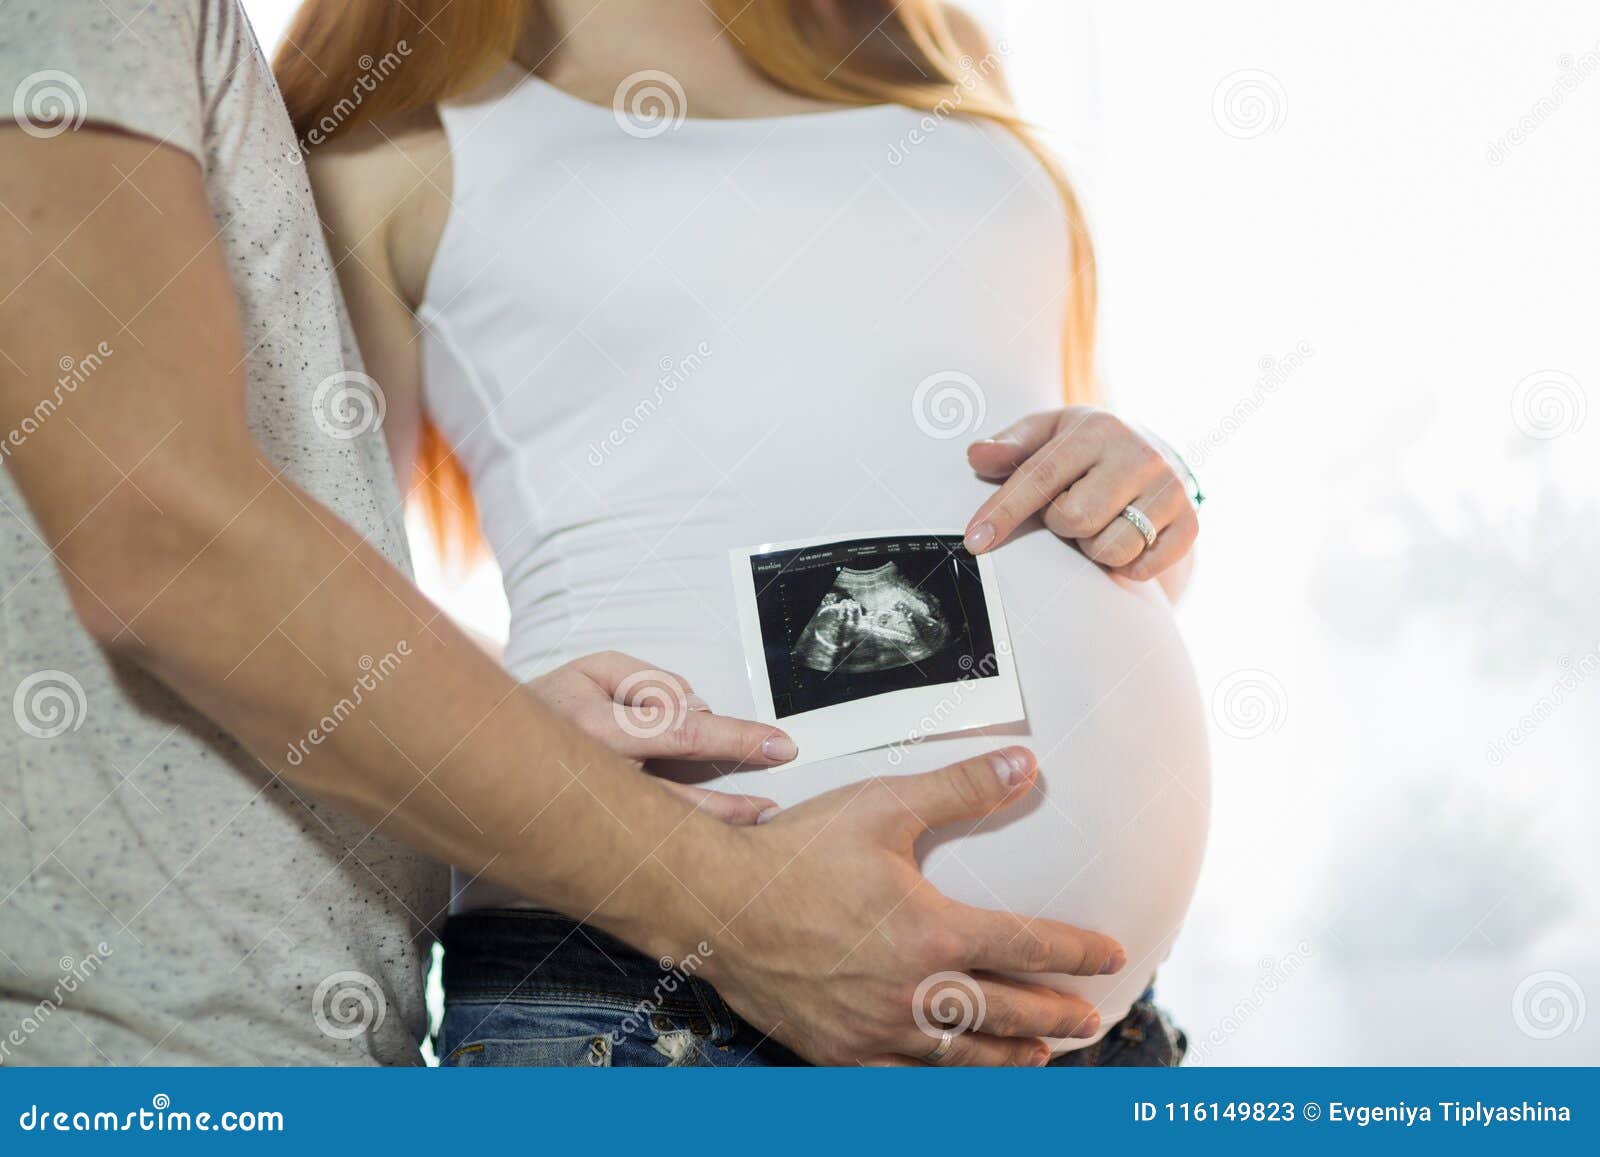 Husband and Pregnant Wife in a Room Stock Image pic picture